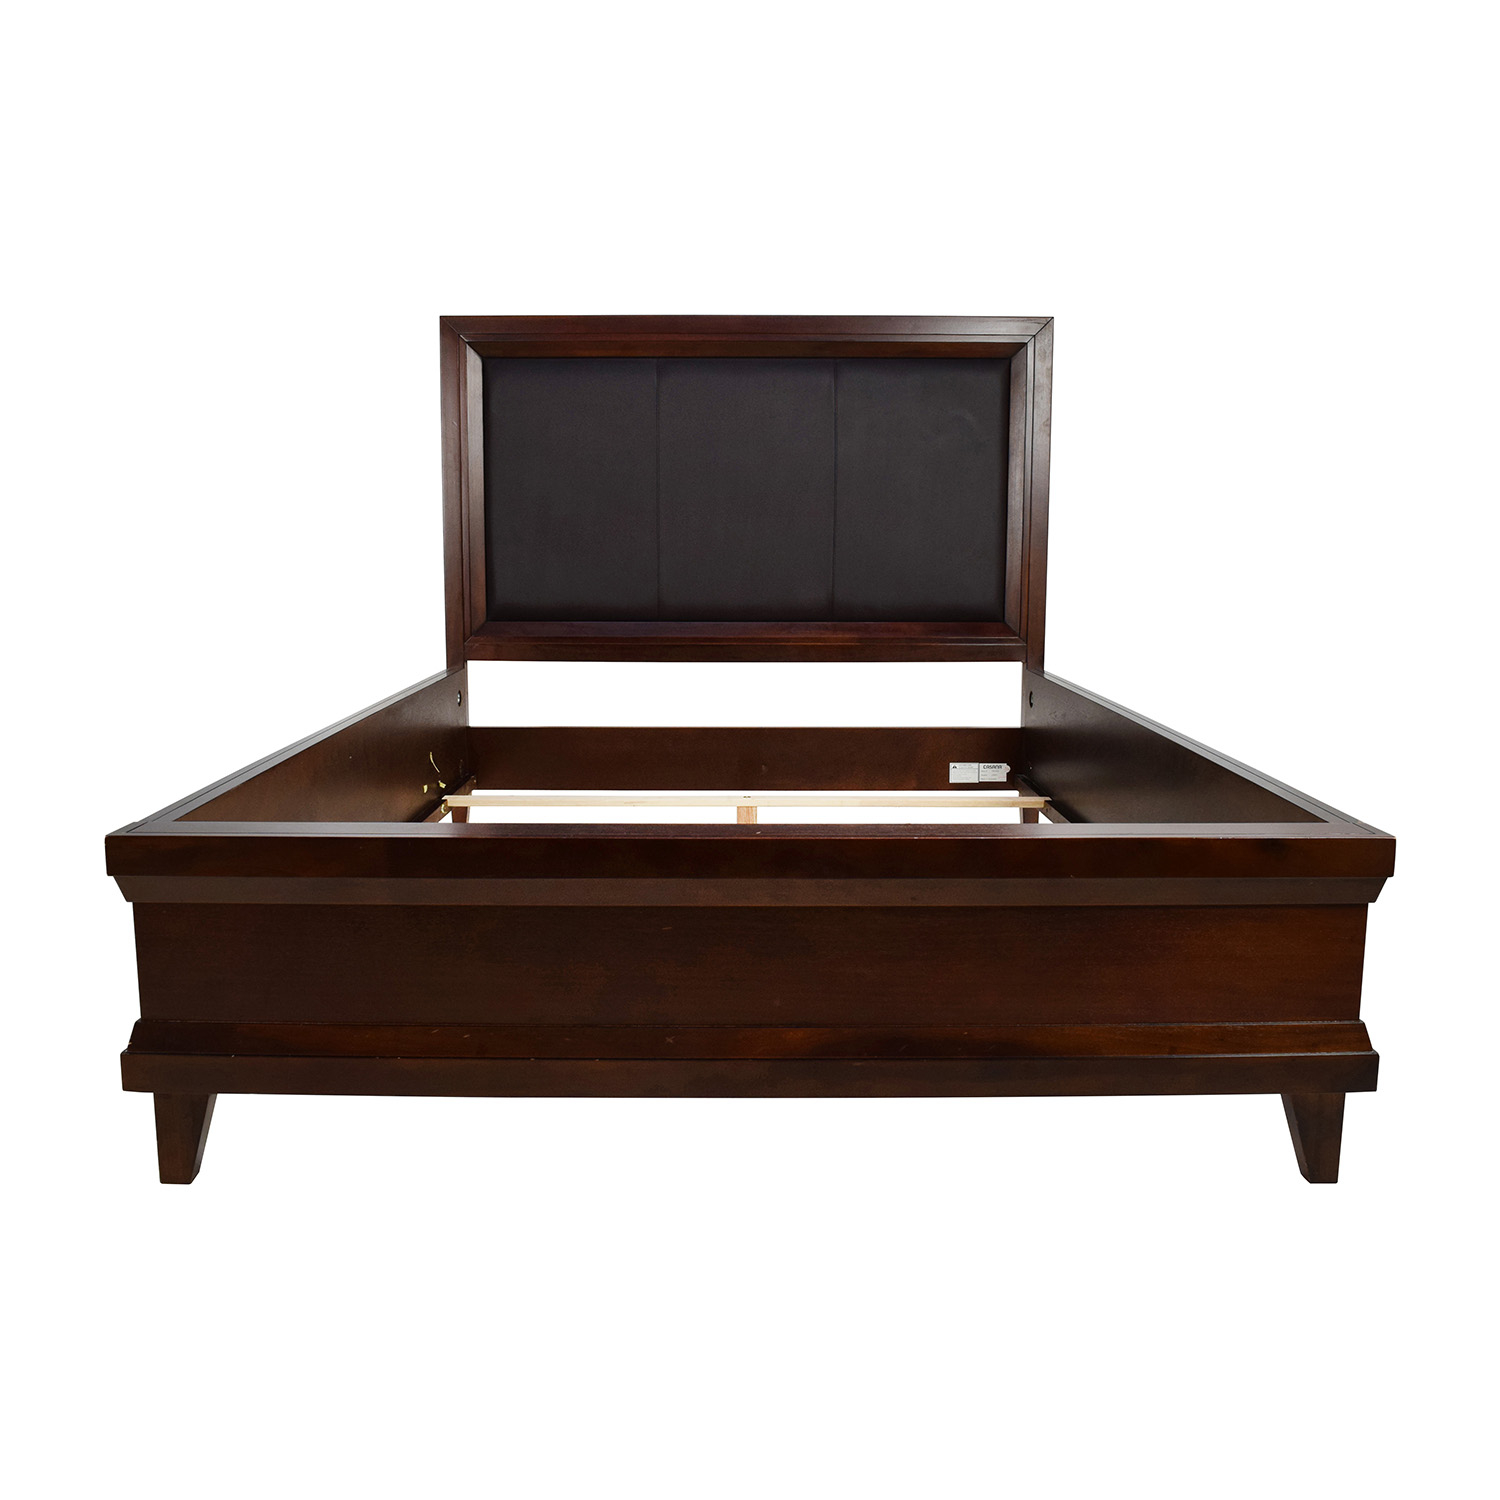 75 Off Raymour Flanigan Raymour Flanigan Vista Queen Bed With Leather Headboard Beds with regard to measurements 1500 X 1500